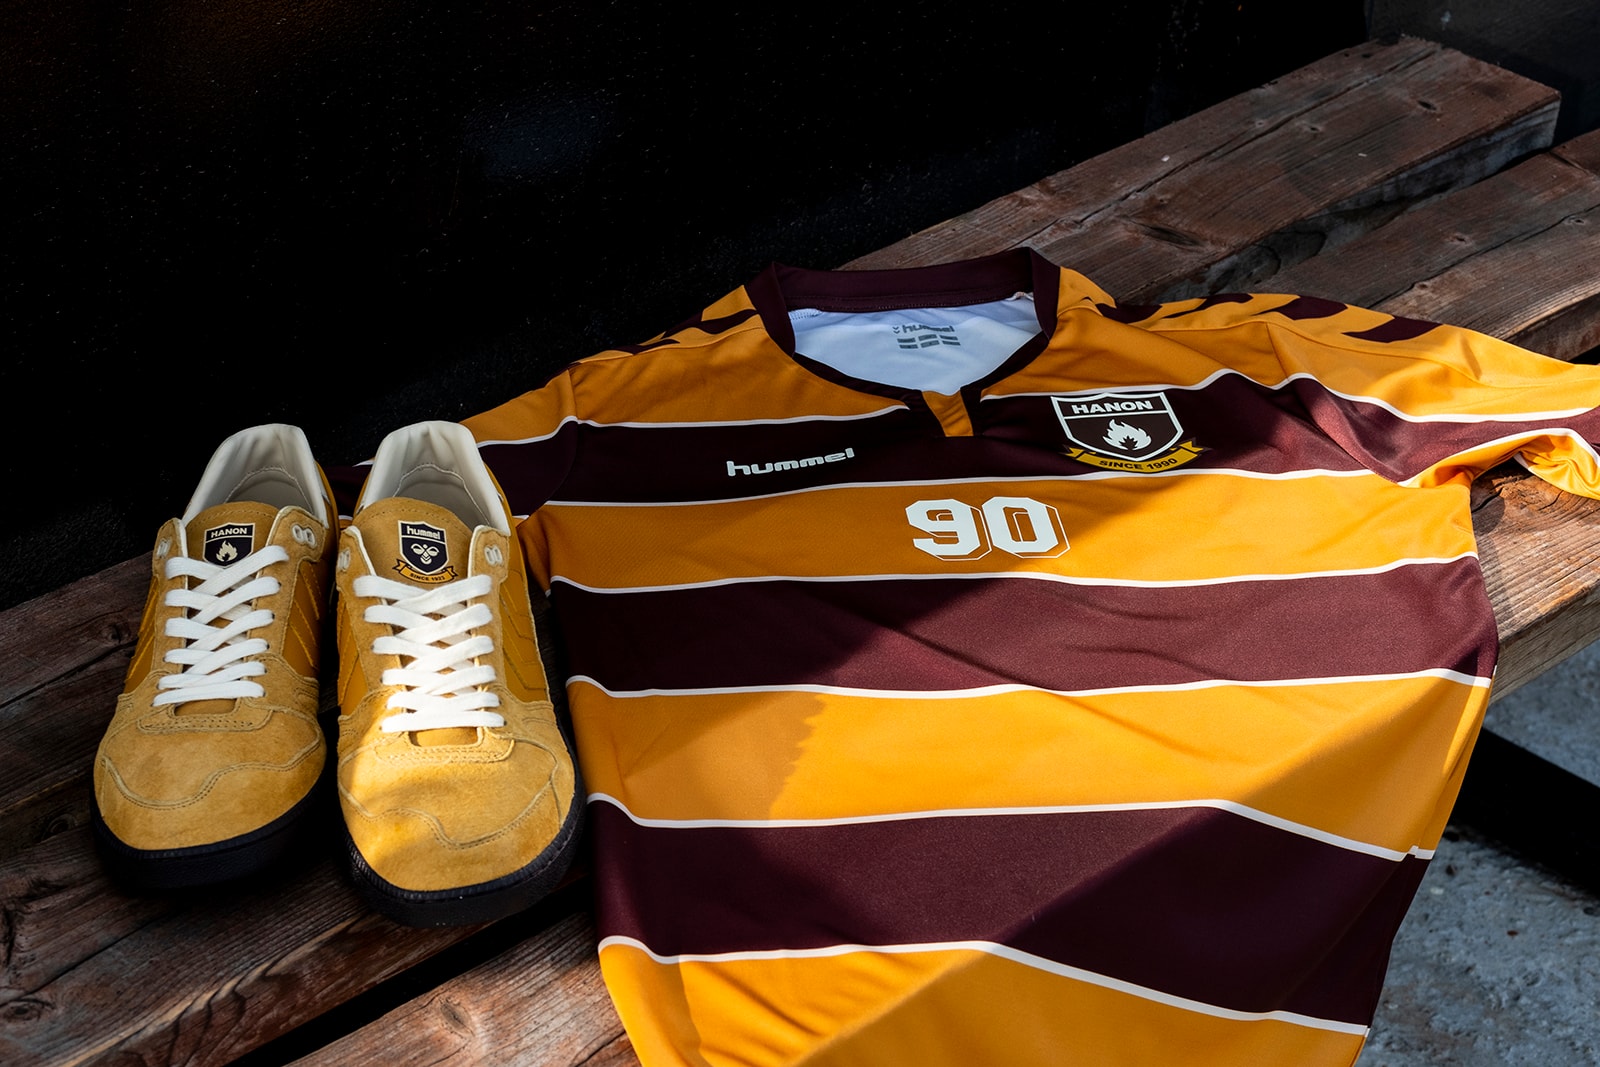 hummel x HANON "Standing Only" Marathona OG HB Team Super Trimm Rothes FC Forres Mechanics Huntly 2018 Collection Collaboration Collab Cop Purchase Buy Kicks Sneakers Trainers Shoes Jerseys Shirts